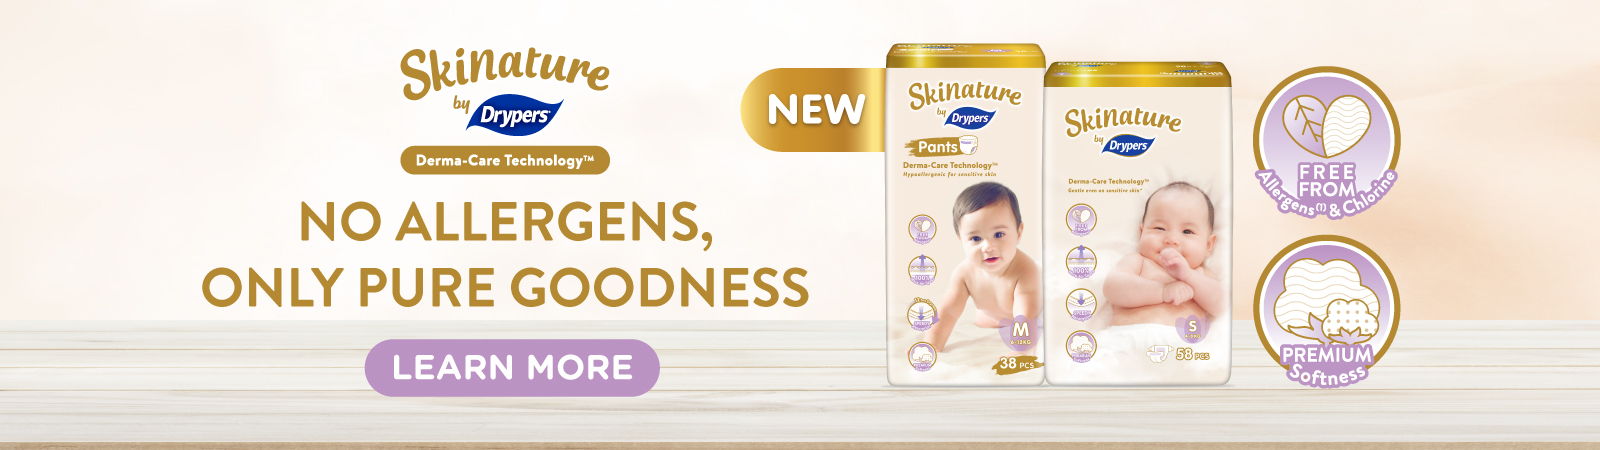 Skinature by Drypers: Happy baby, happier Mommy & Daddy!